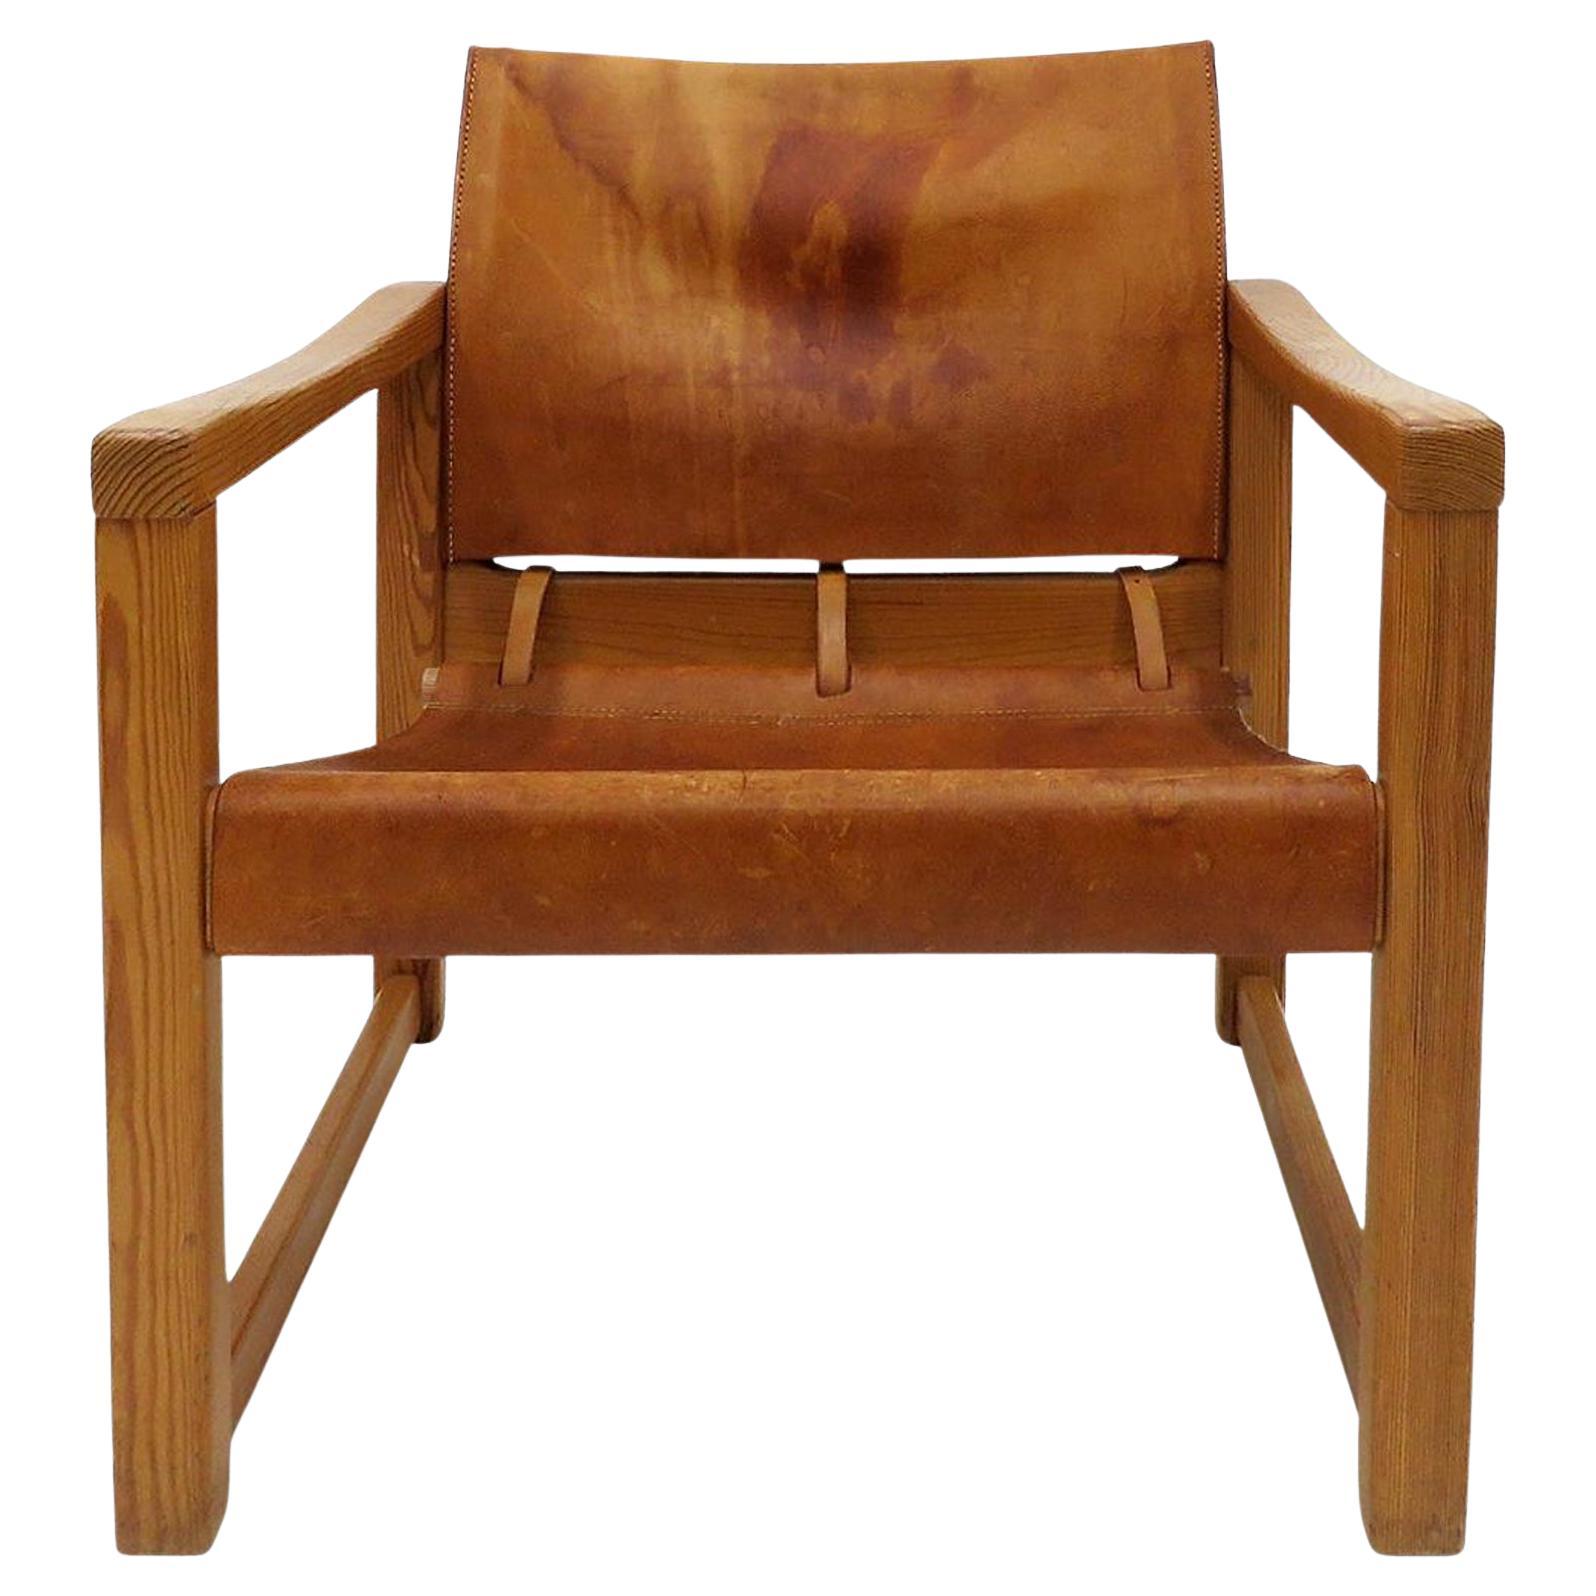 Karin Mobring 'Diana' Side Chair, 1970 For Sale